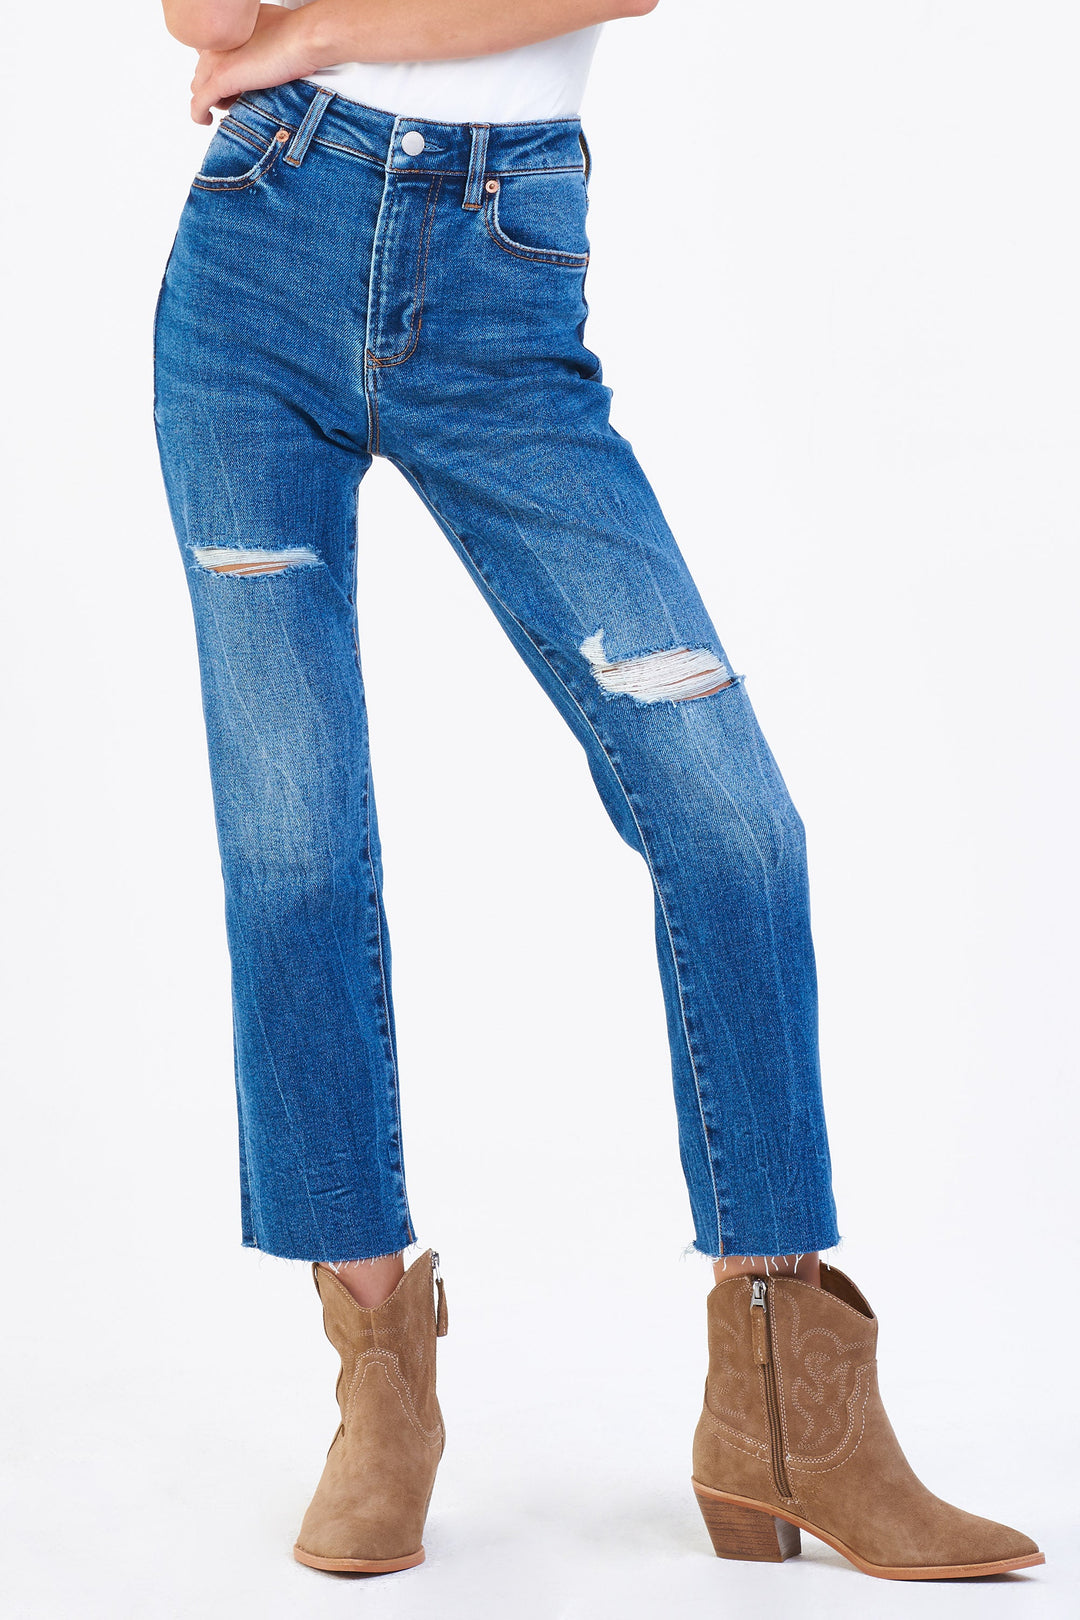 image of a female model wearing a FRANKIE SUPER HIGH RISE CROPPED STRAIGHT JEANS NORMANDY DEAR JOHN DENIM 